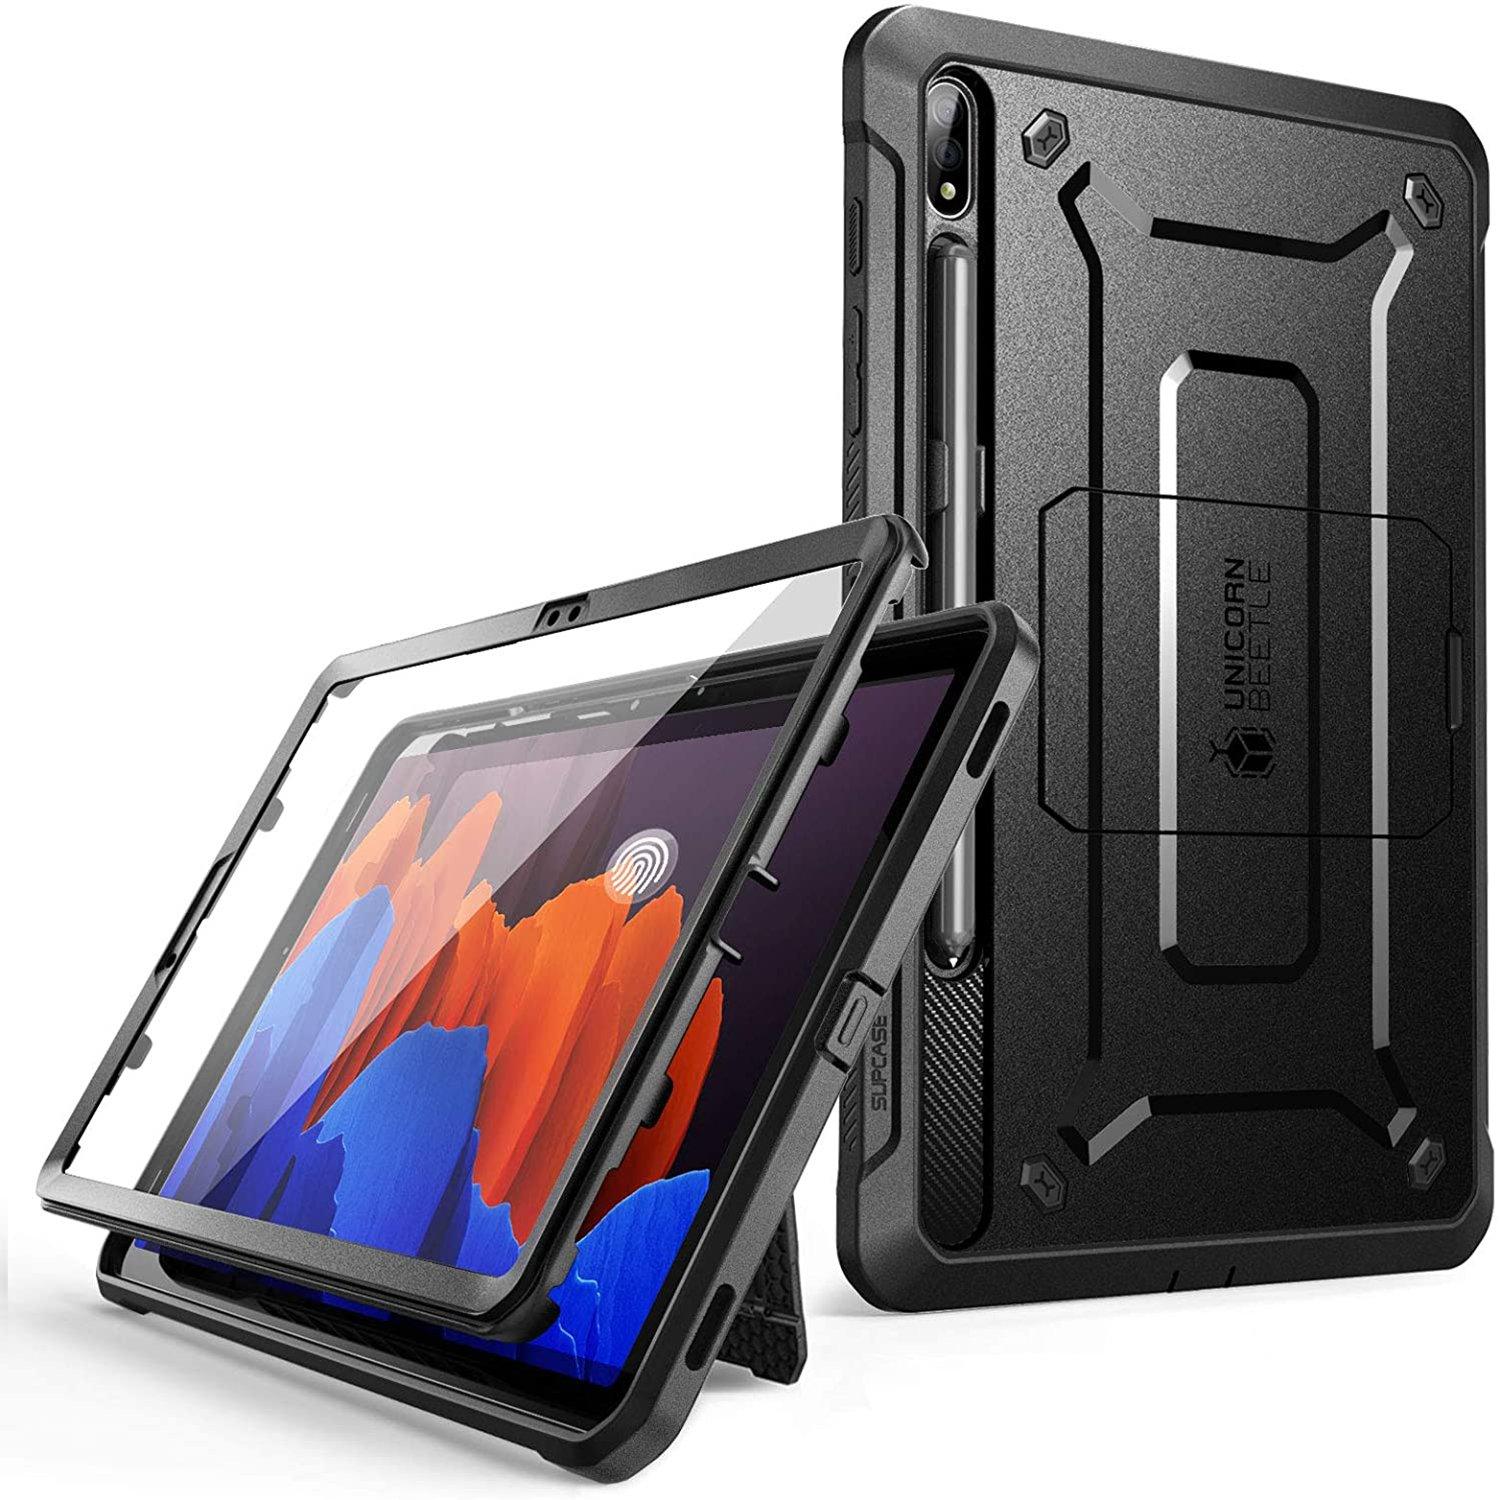 Supcase UB Pro Series Full-Body Rugged Case with Kickstand for Samsung Galaxy Tab S7+(2020)12.4'', Black Default Supcase Default 